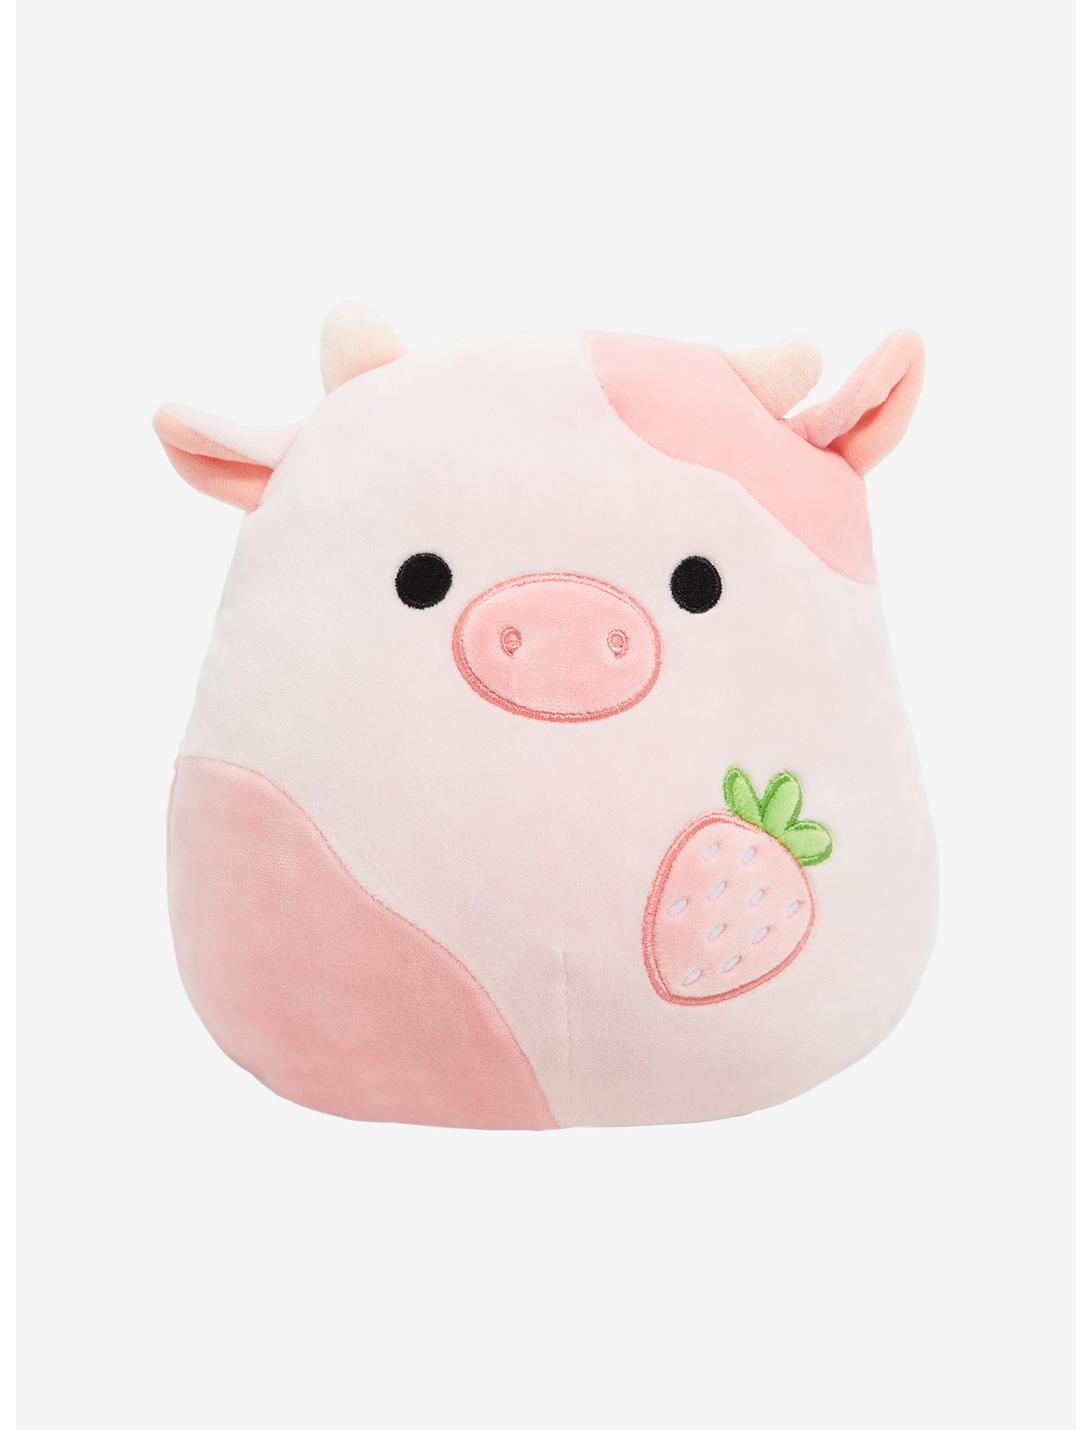 Squishmallows Reshma the Strawberry Cow 8 Inch Plush - BoxLunch Exclusive, , hi-res